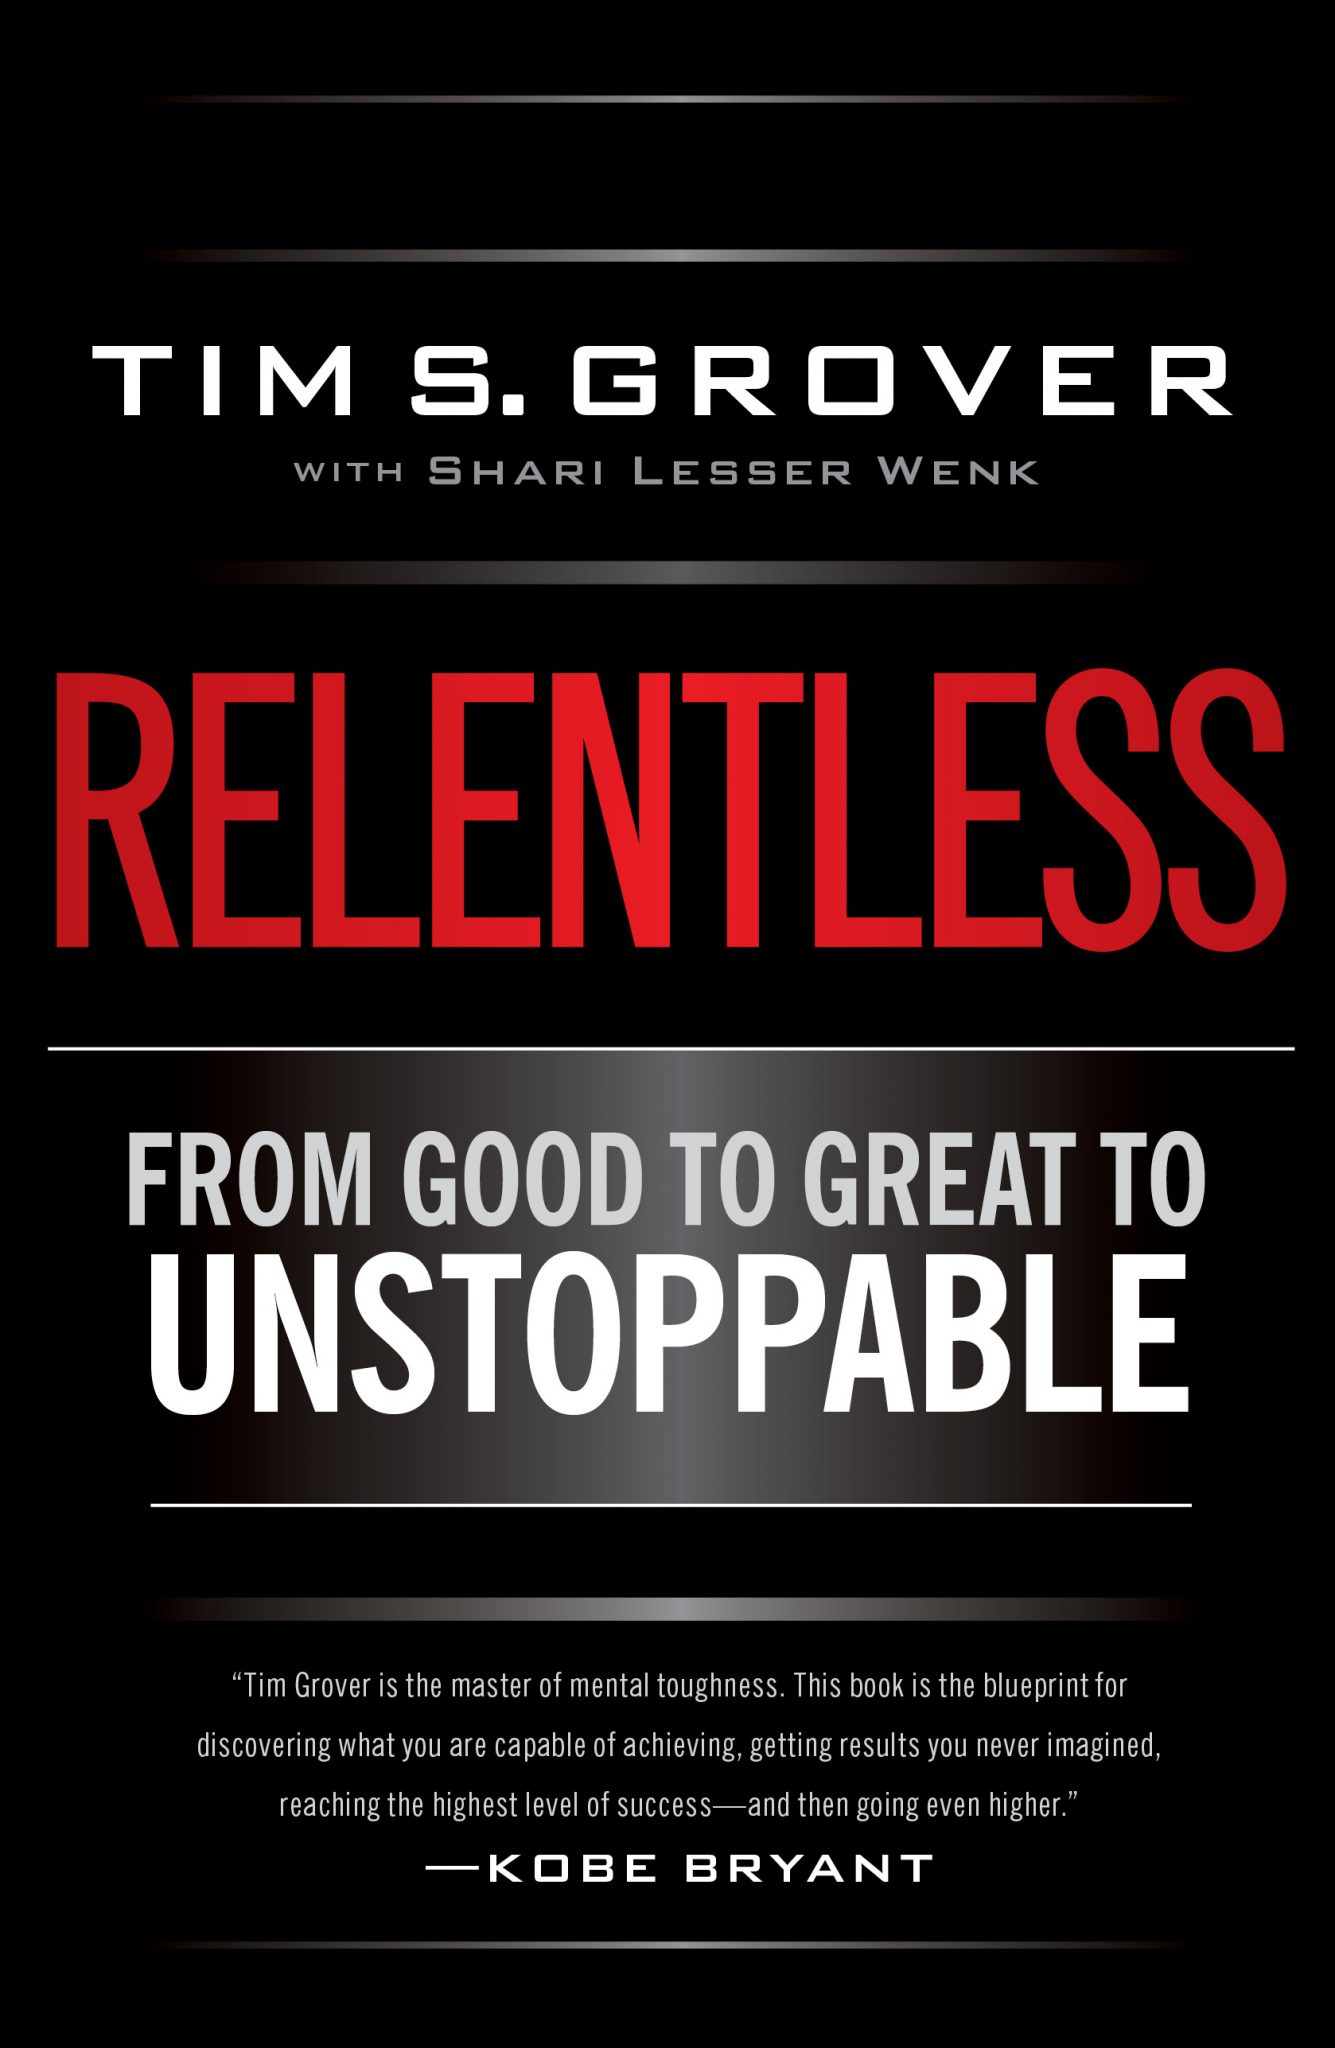 “RELENTLESS”, by TIM S. GROVER Book Summary